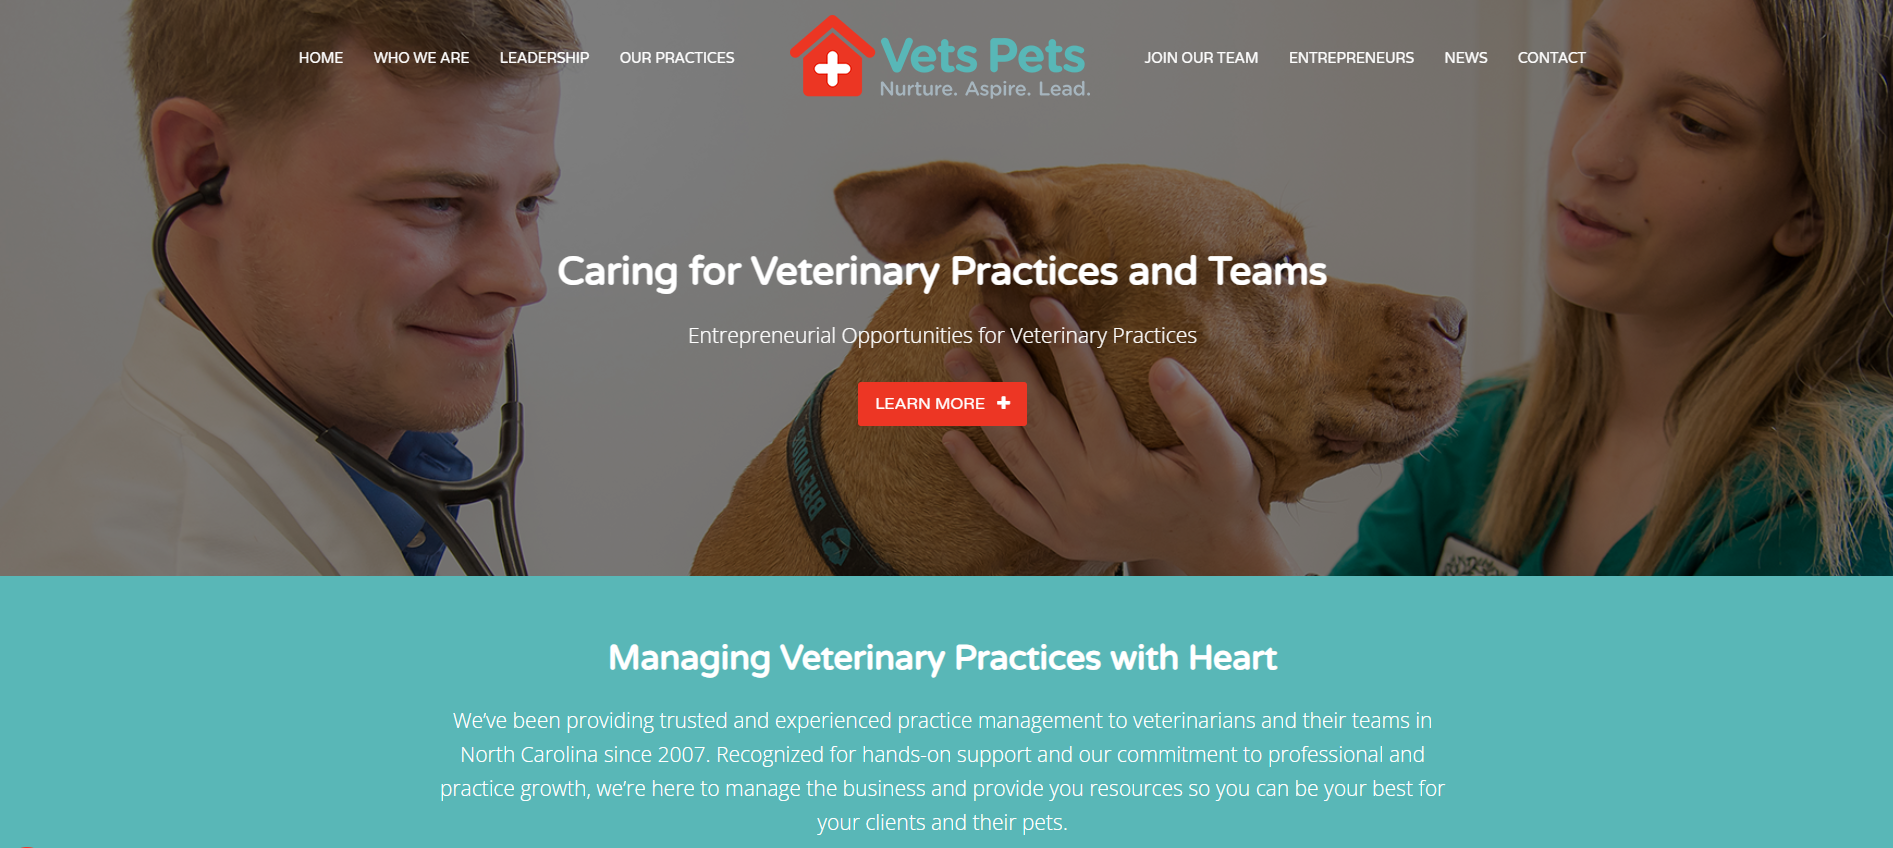 thevetspets homepage